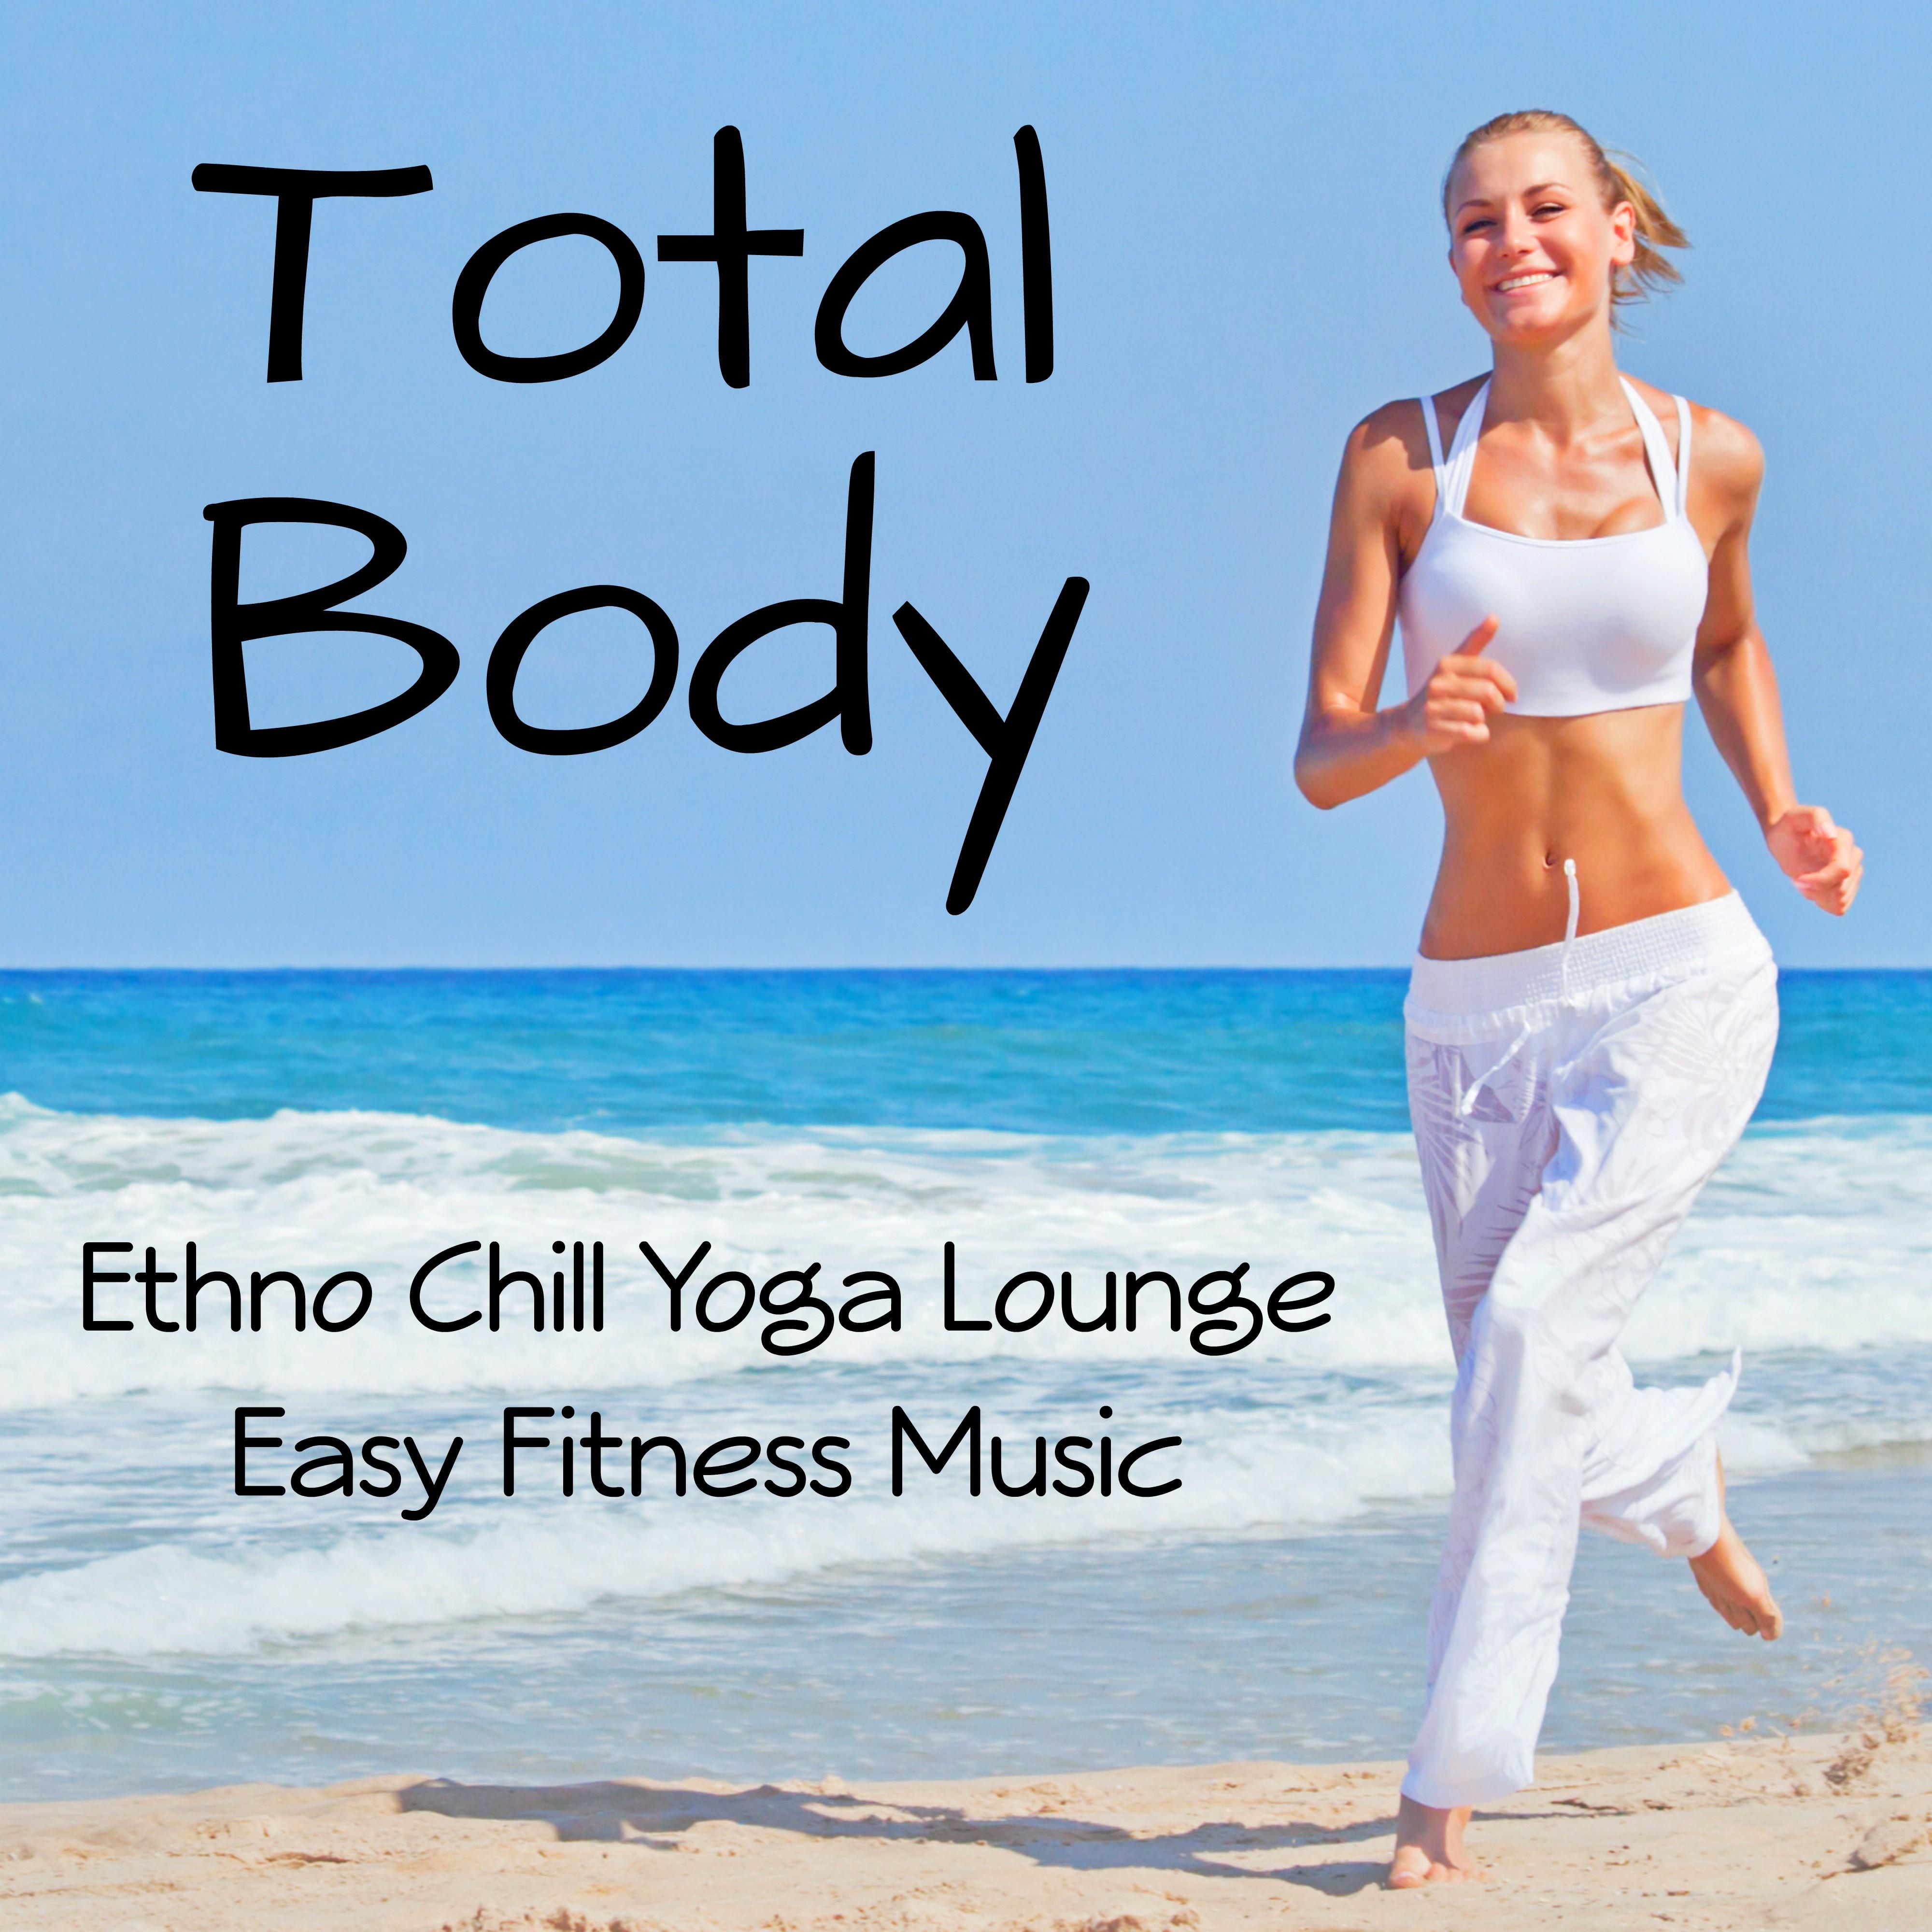 Total Body - Ethno Chill Yoga Lounge Easy Fitness Music for Massage Spa Power Pilates and Relax Time